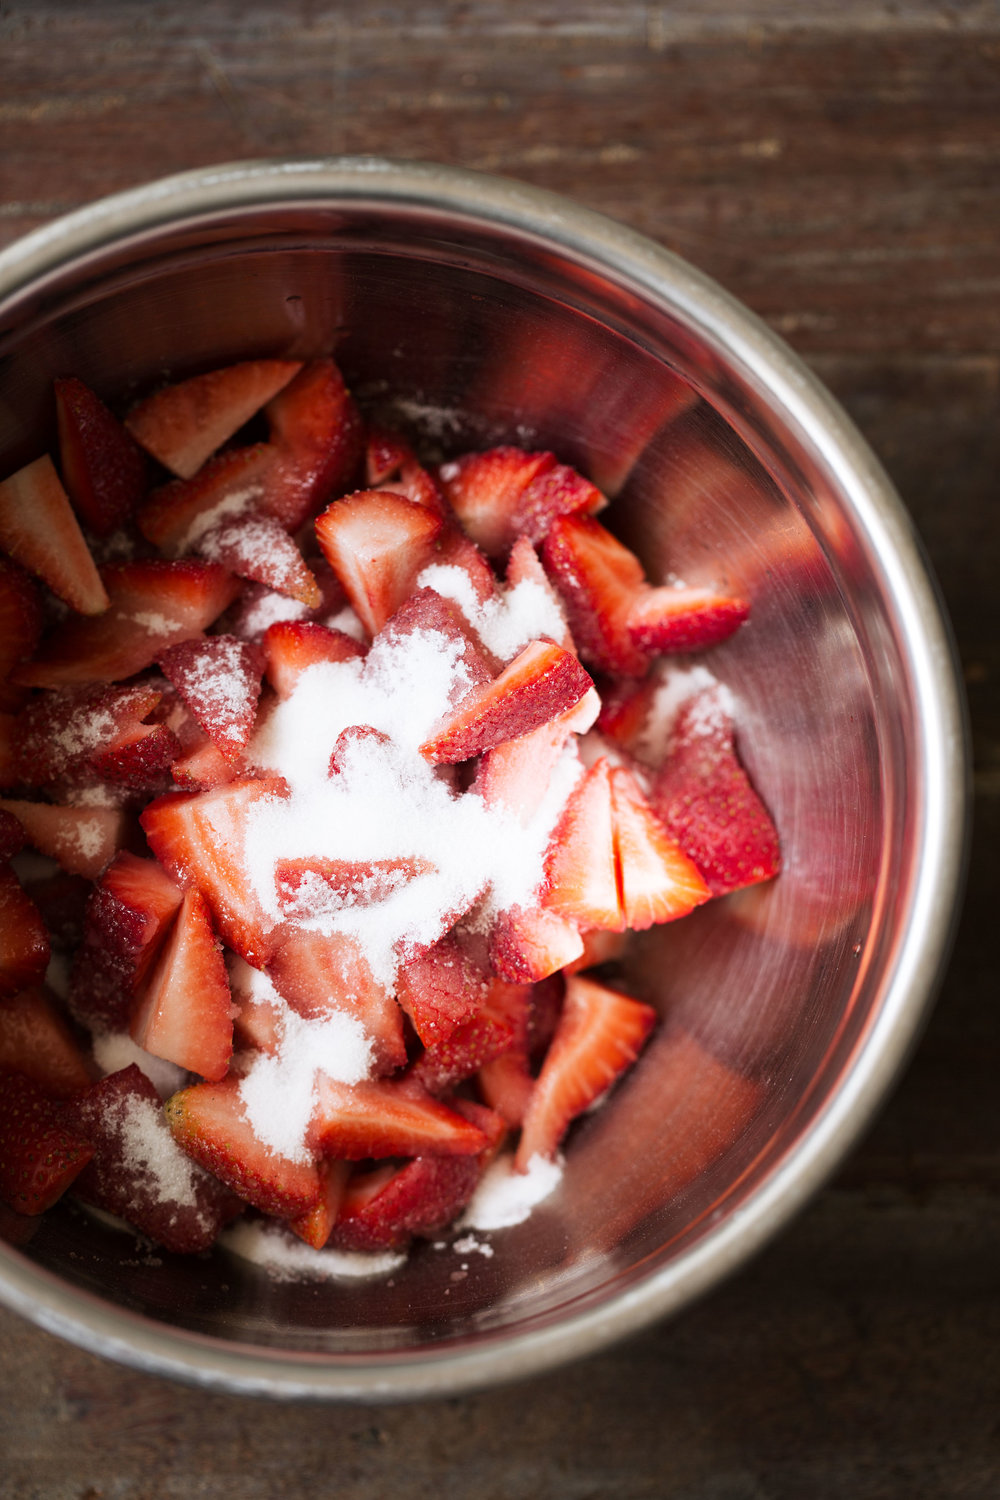 sliced strawberries with sugar mascerated